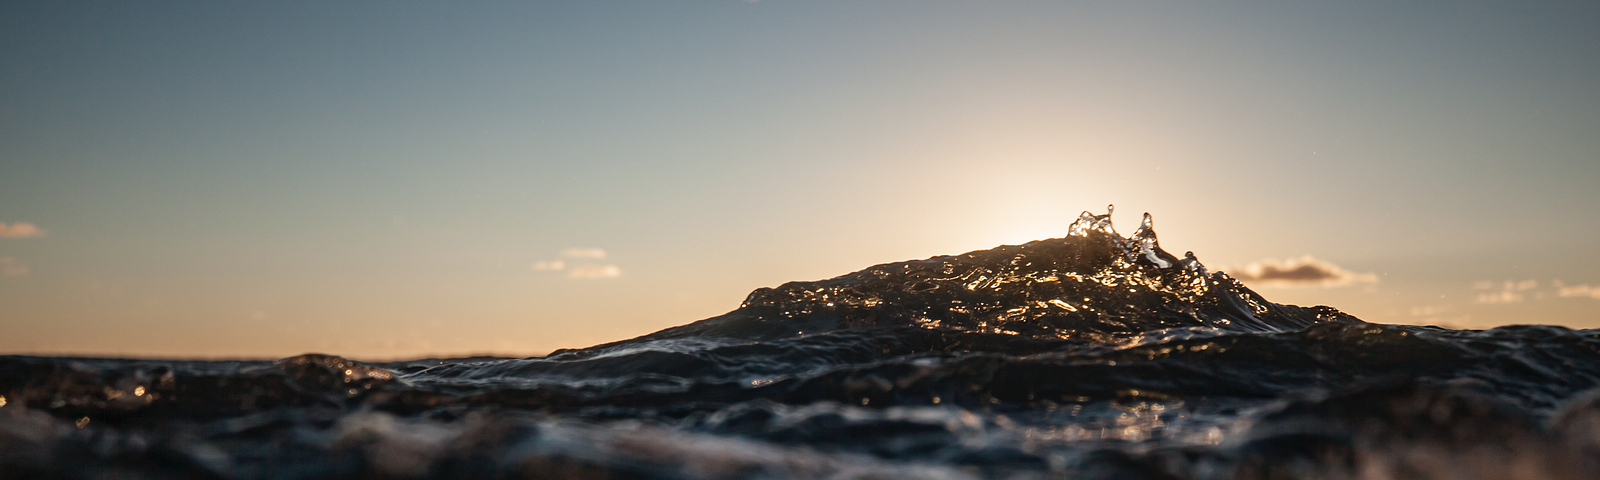 Photograph of a wave at sunset. The peak of the wave is highlighted by the sun.